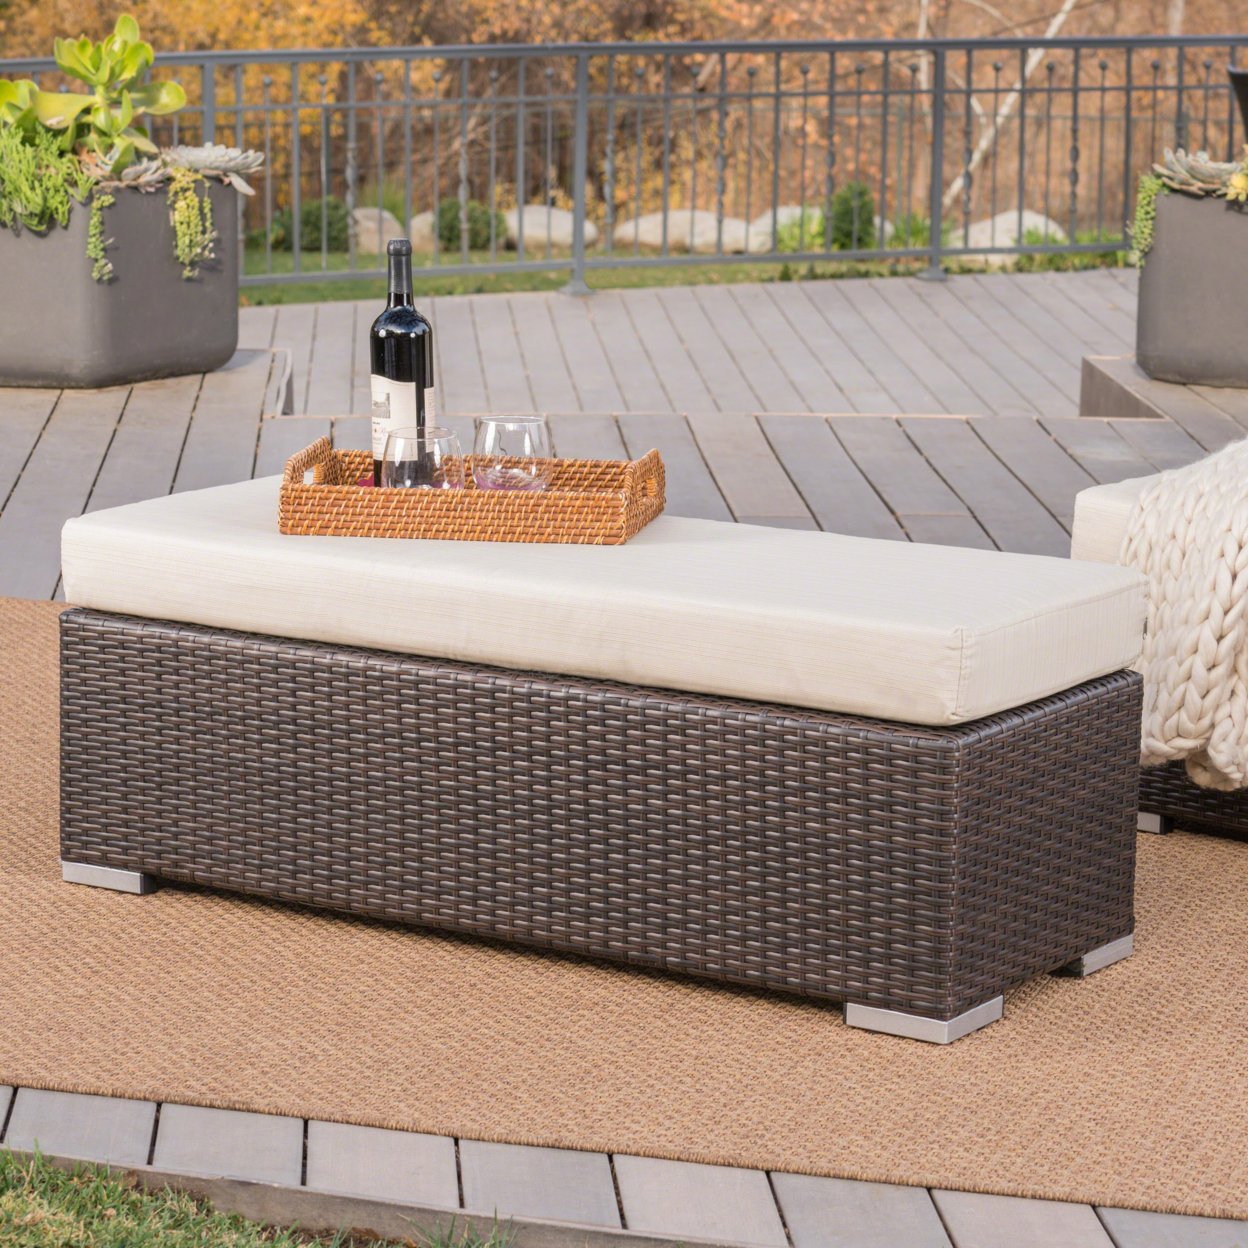 Santa Rosa Outdoor Wicker Bench With Water Resistant Cushion - Multi-brown/Beige